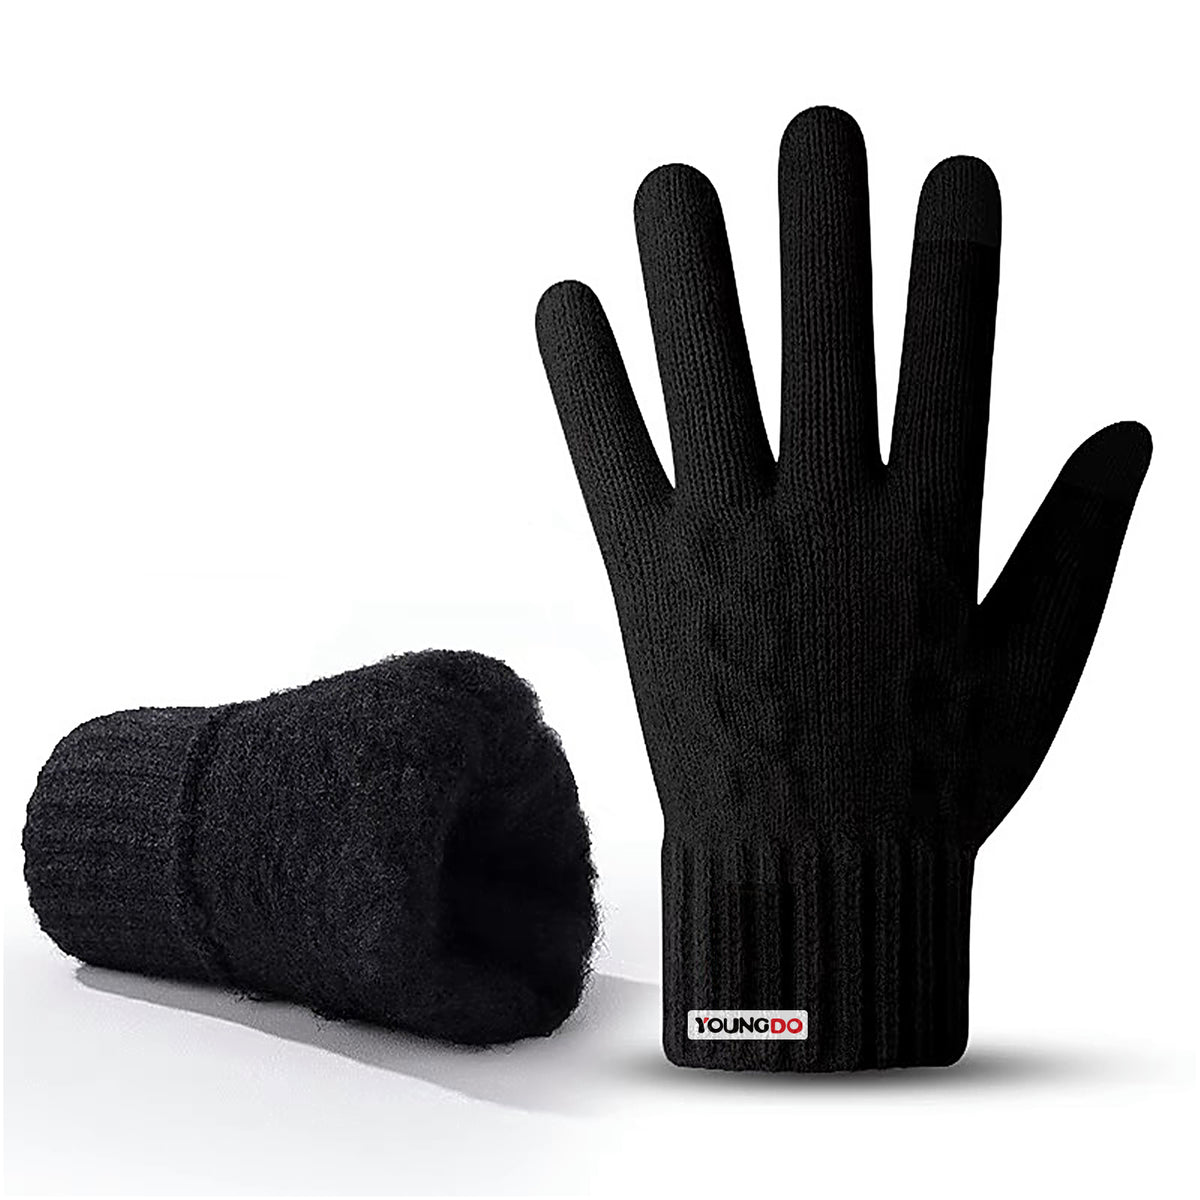 YOUNGDO Warm Gloves gloves for cold weather，Winter Gloves for Men Women